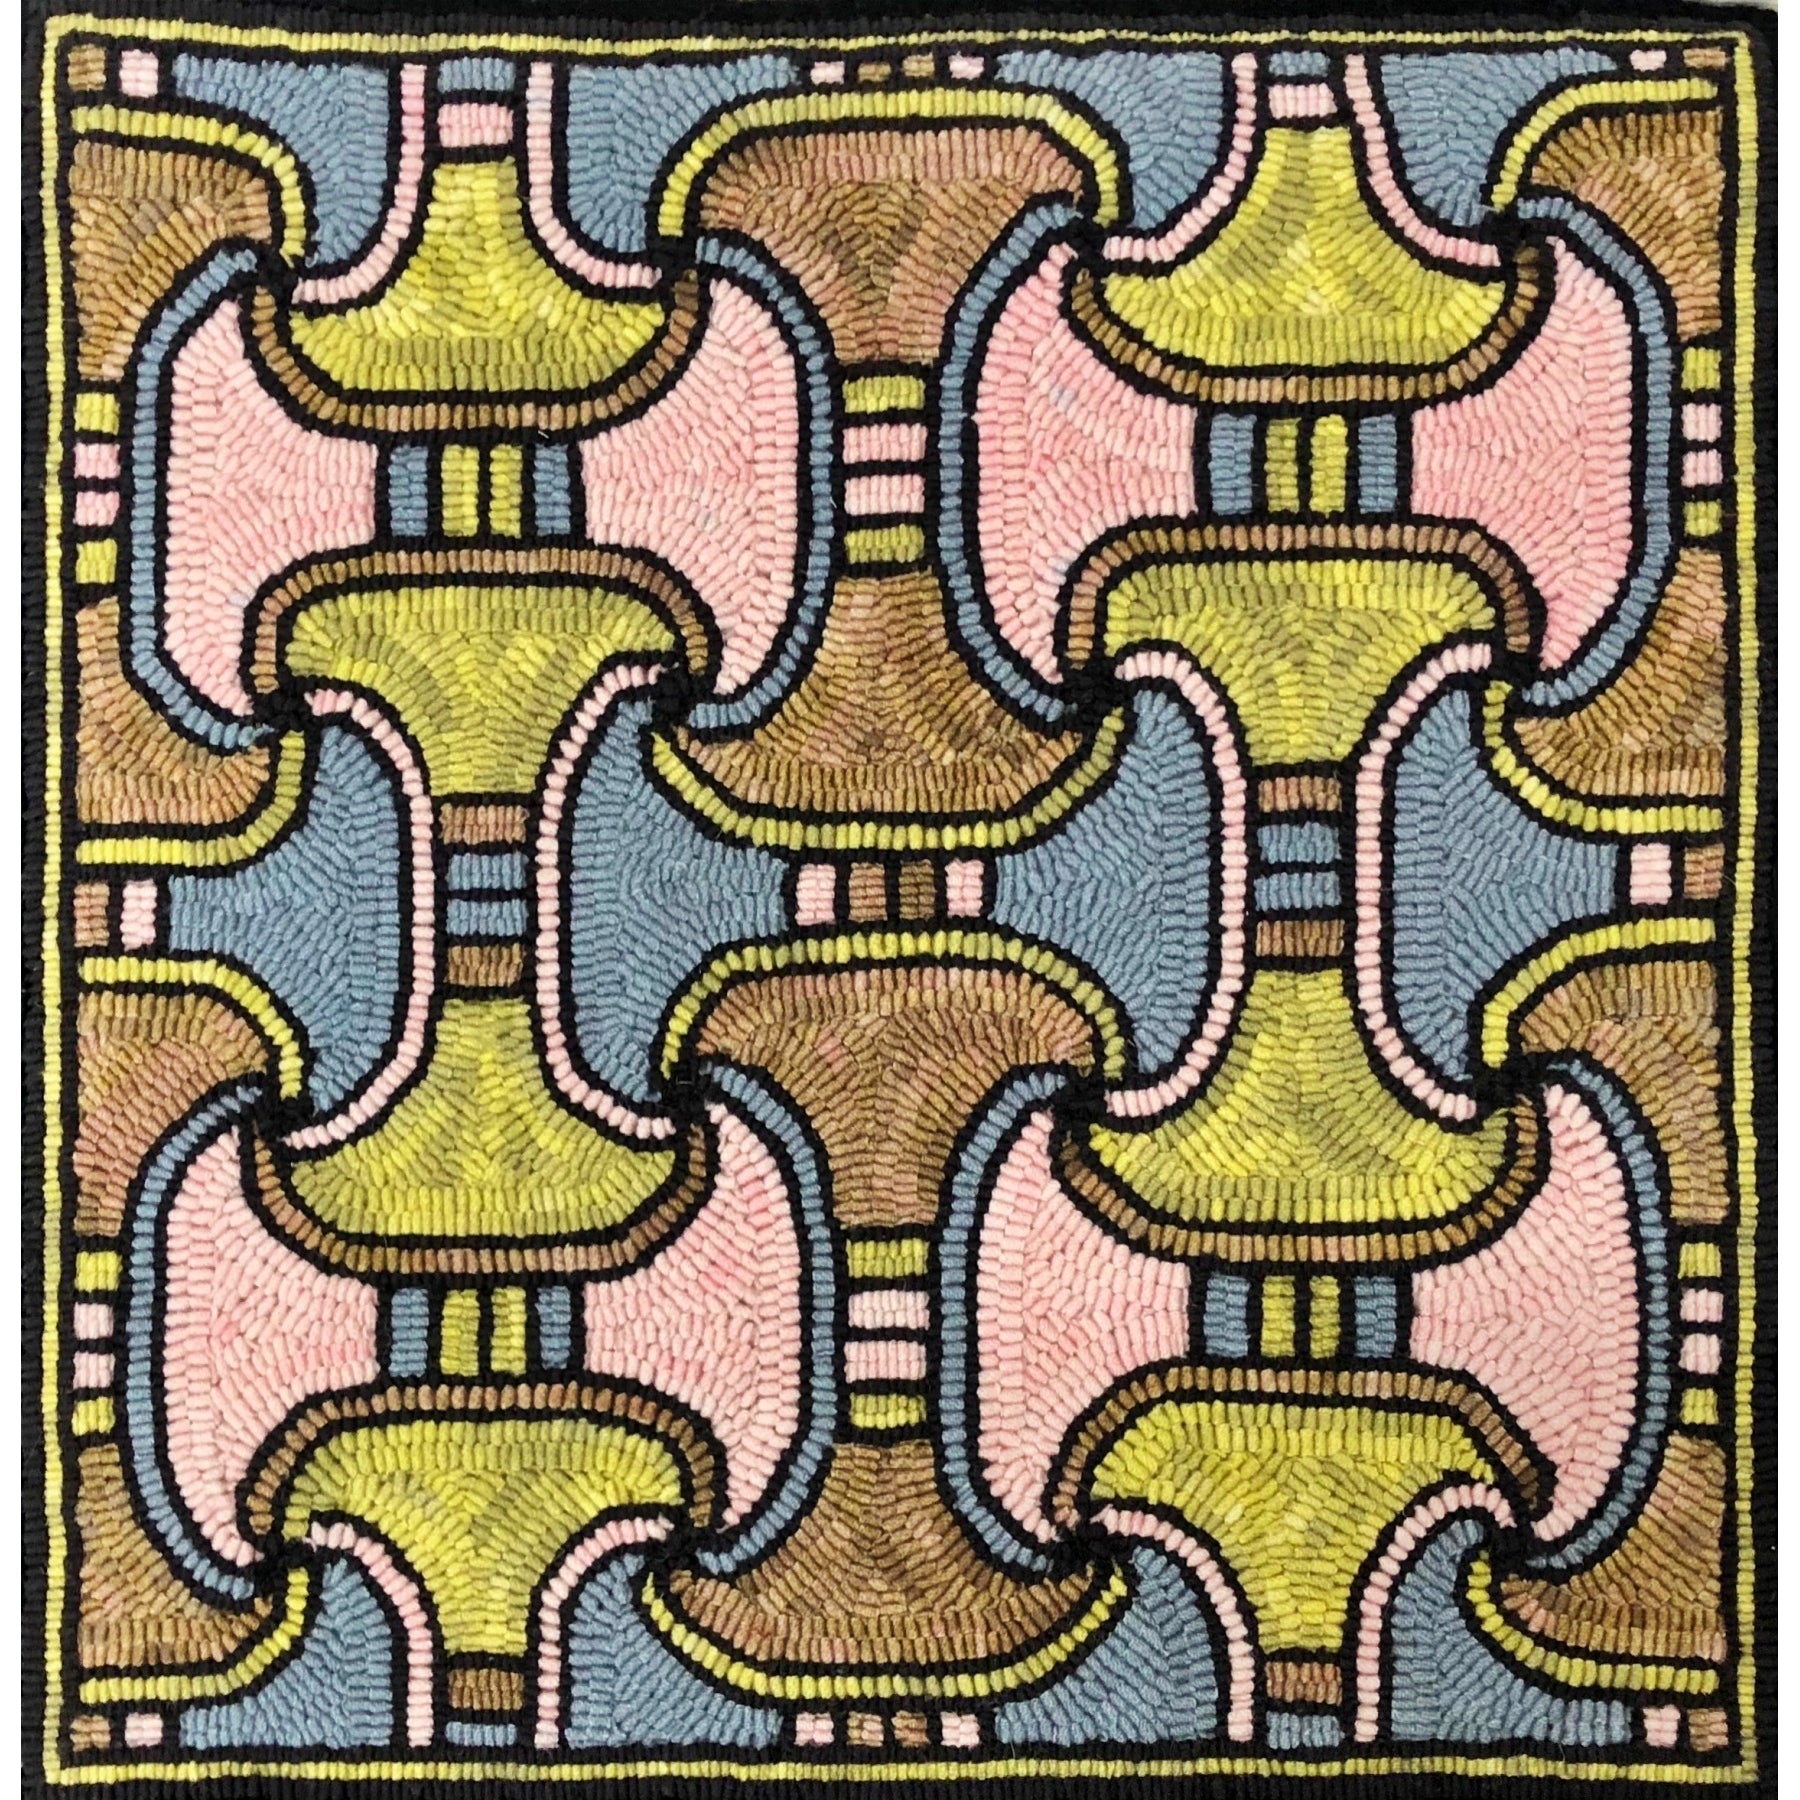 Symmetry, rug hooked by Pat Murray